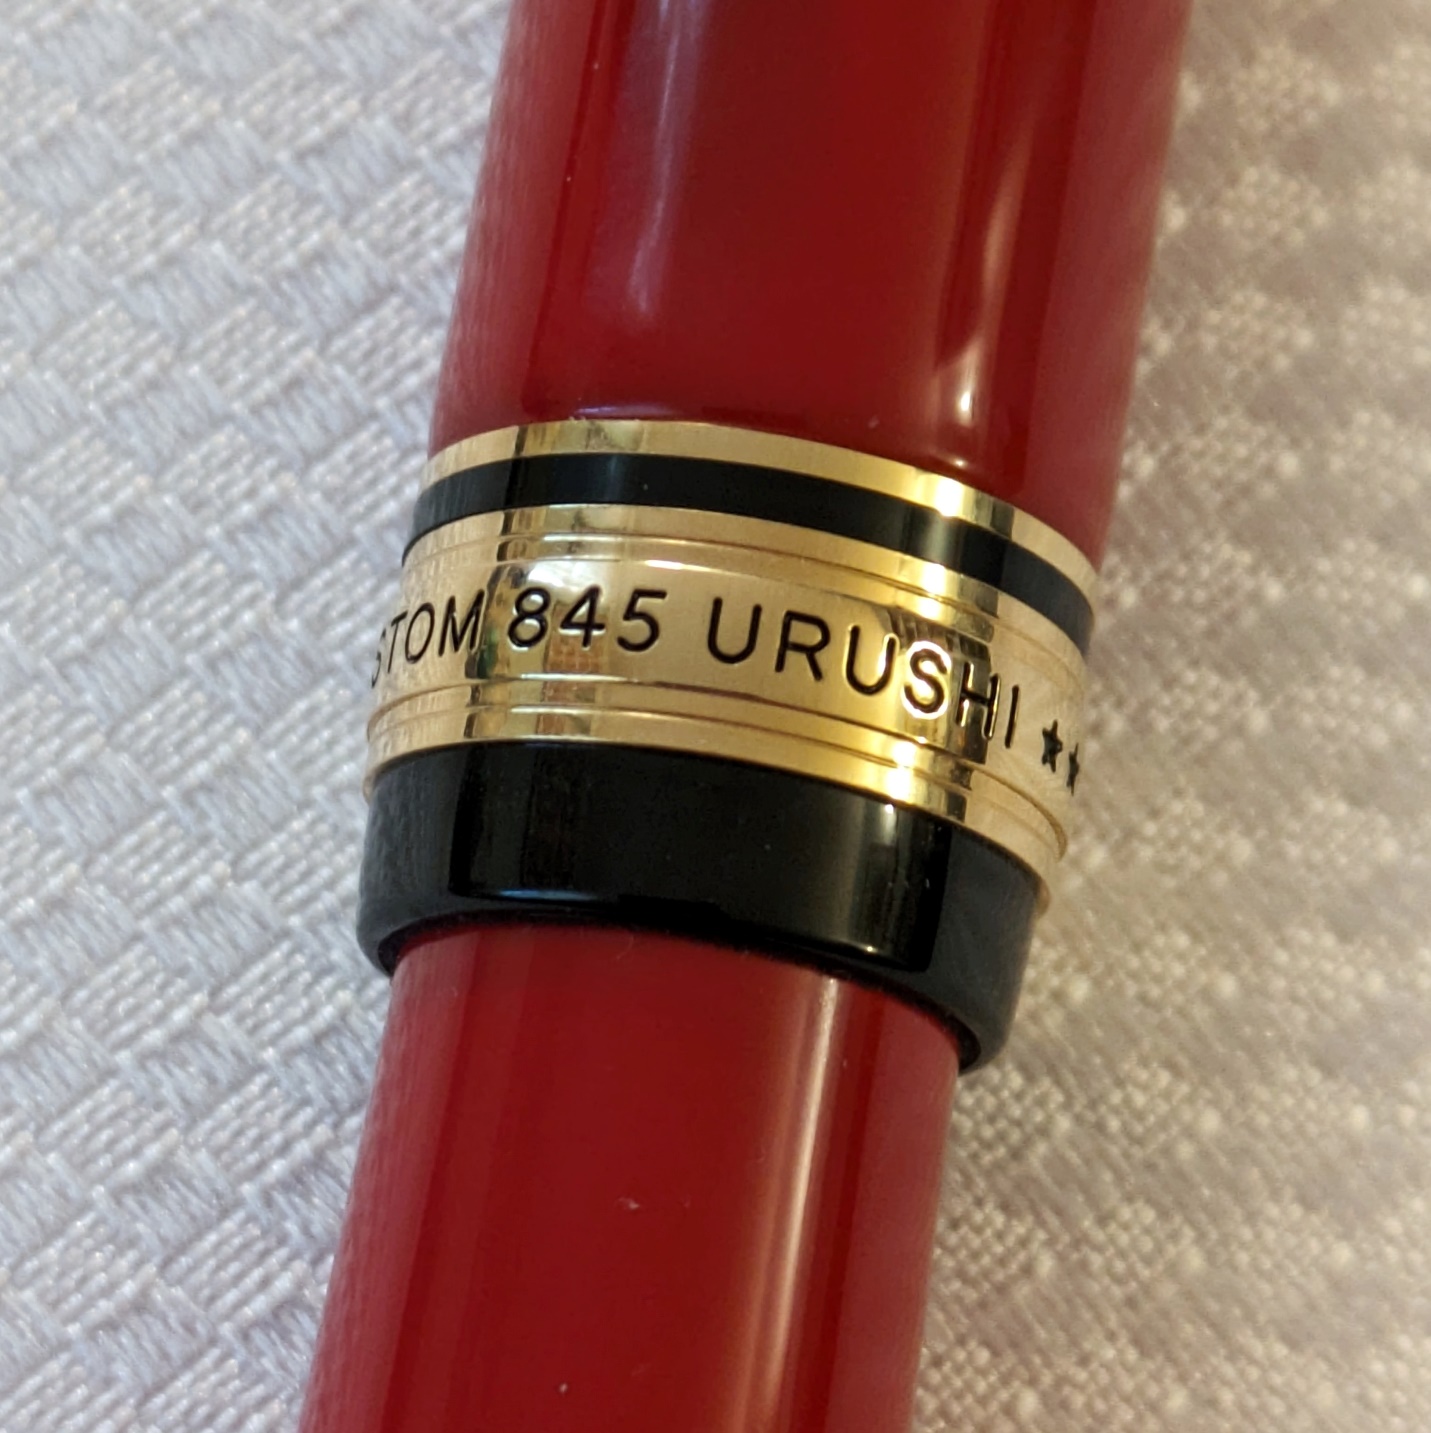 Black, gold, and deep red make an outstanding color combination on this pen.